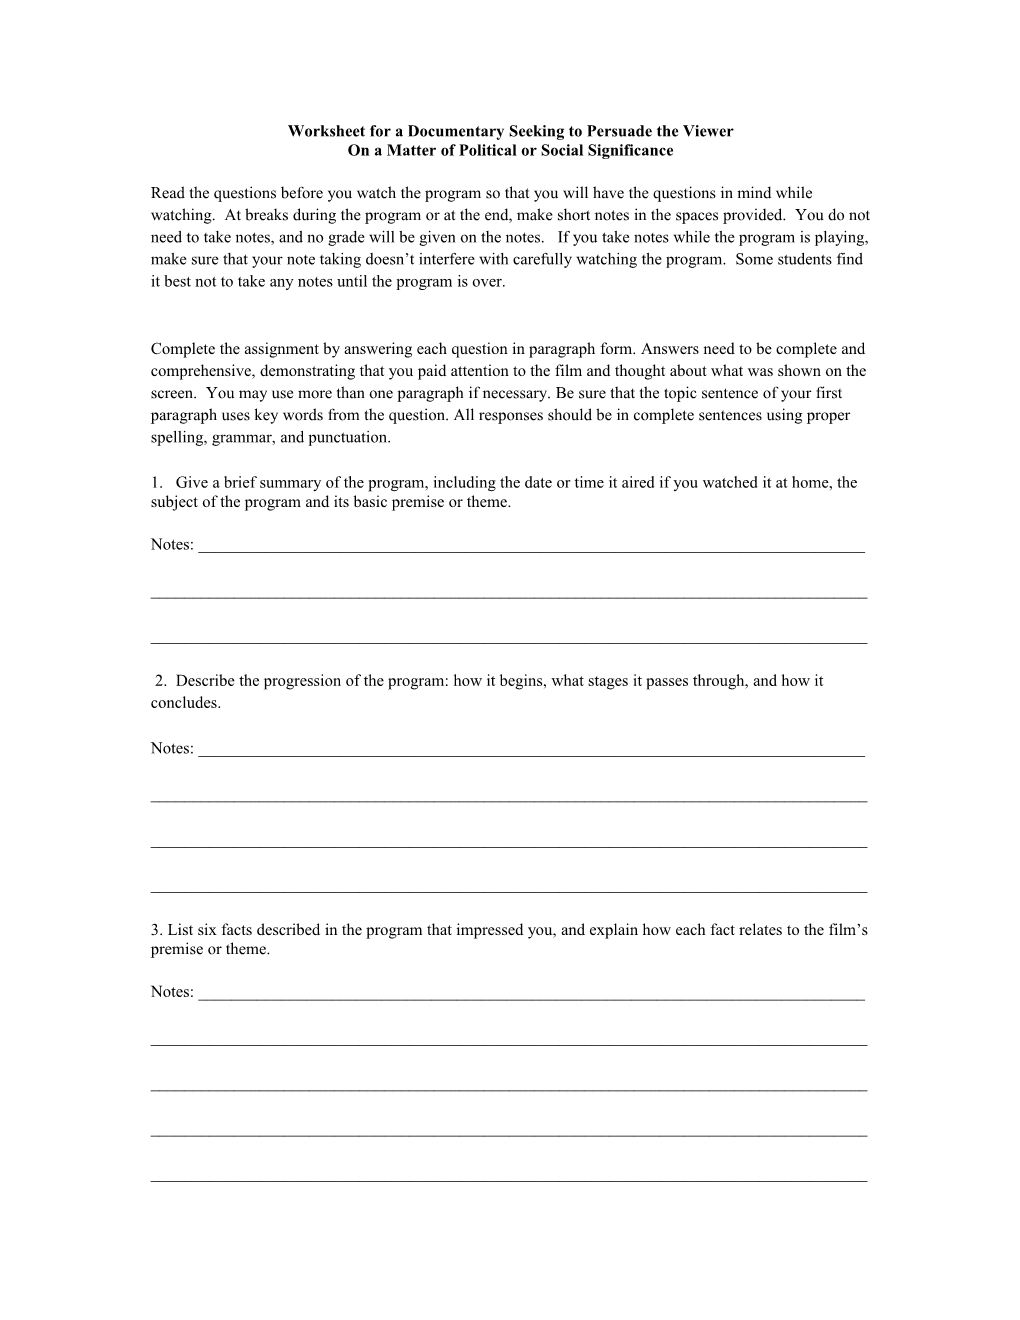 Worksheet for a Documentary Seeking to Persuade the Viewer